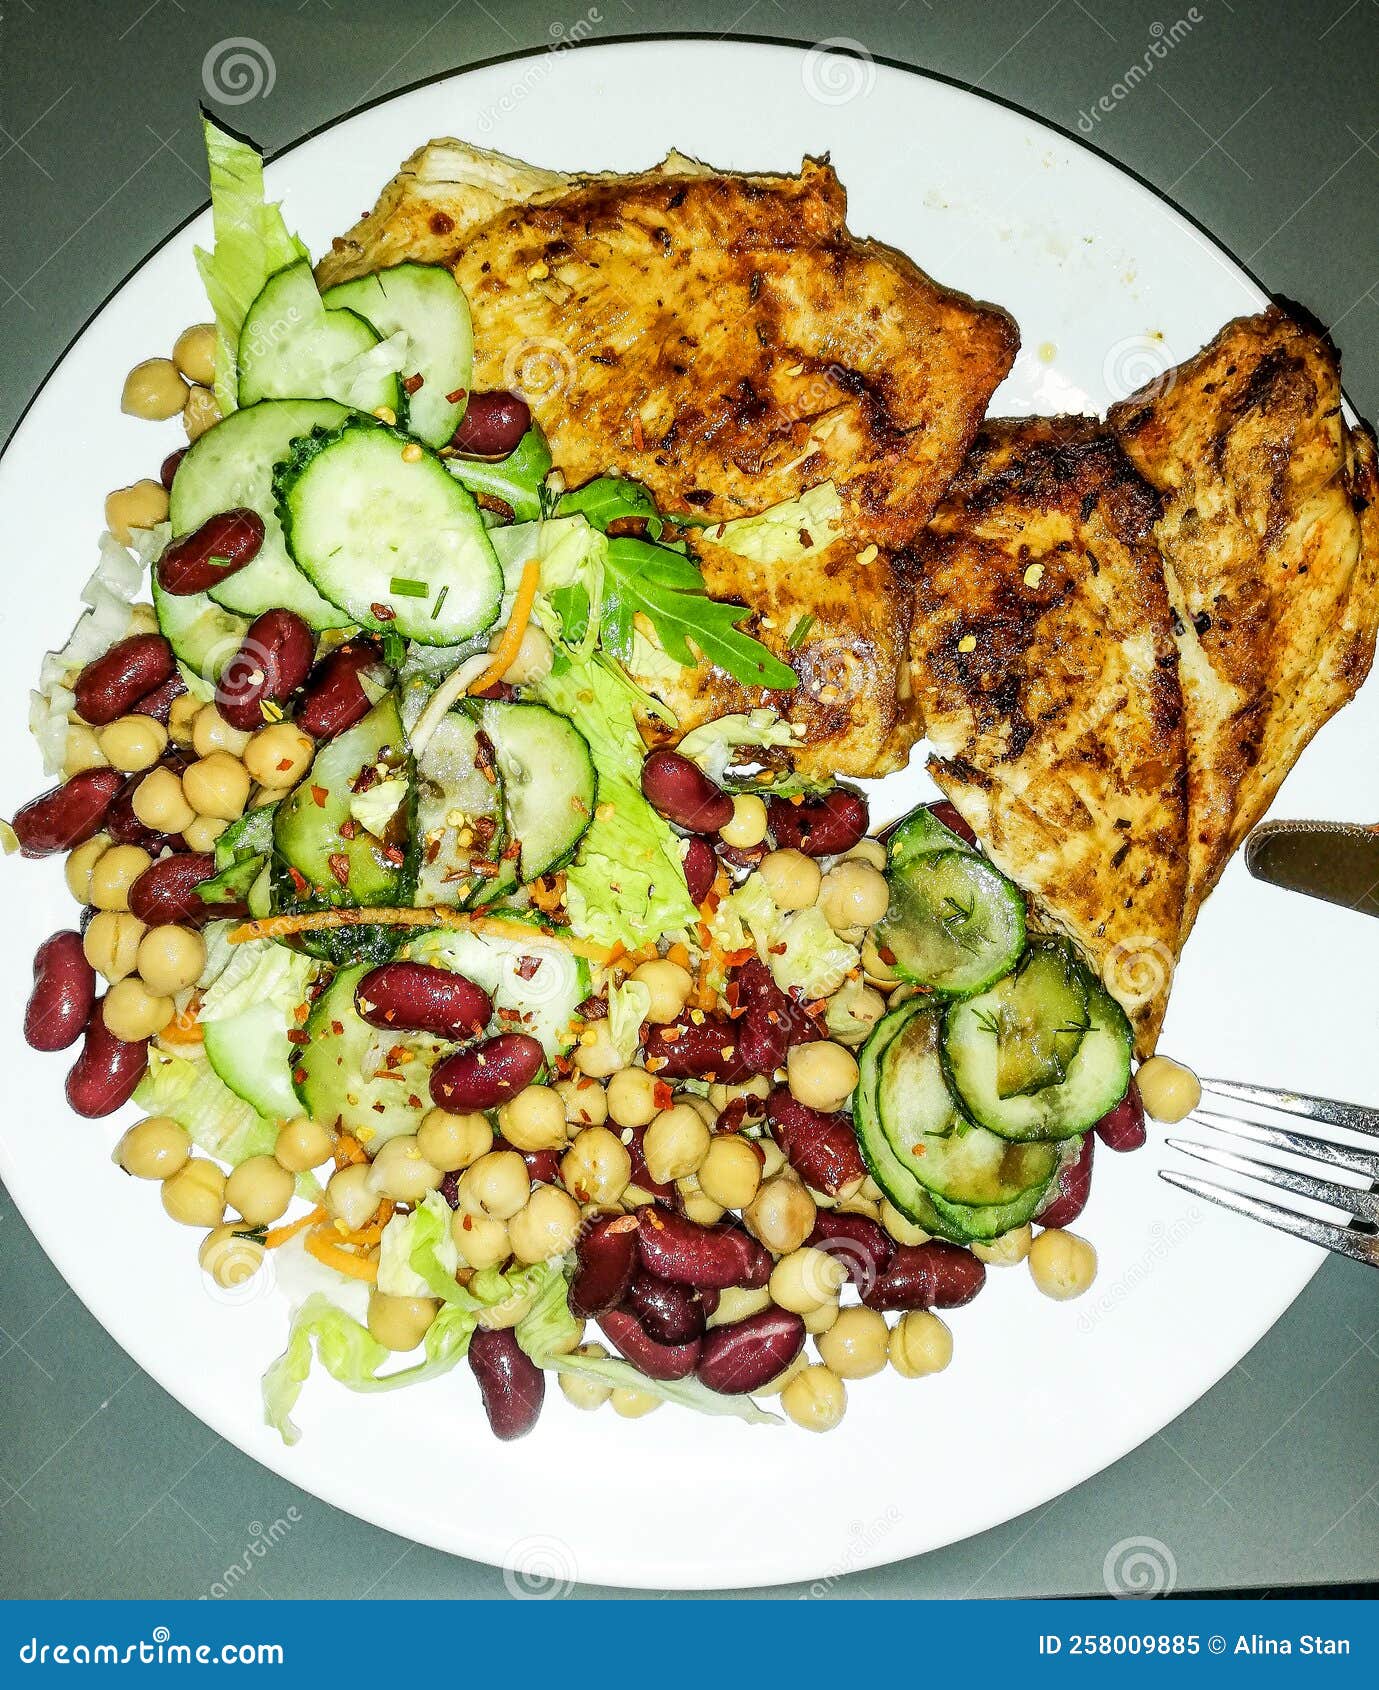 healthy lunch salad with chicken for a fitness diet